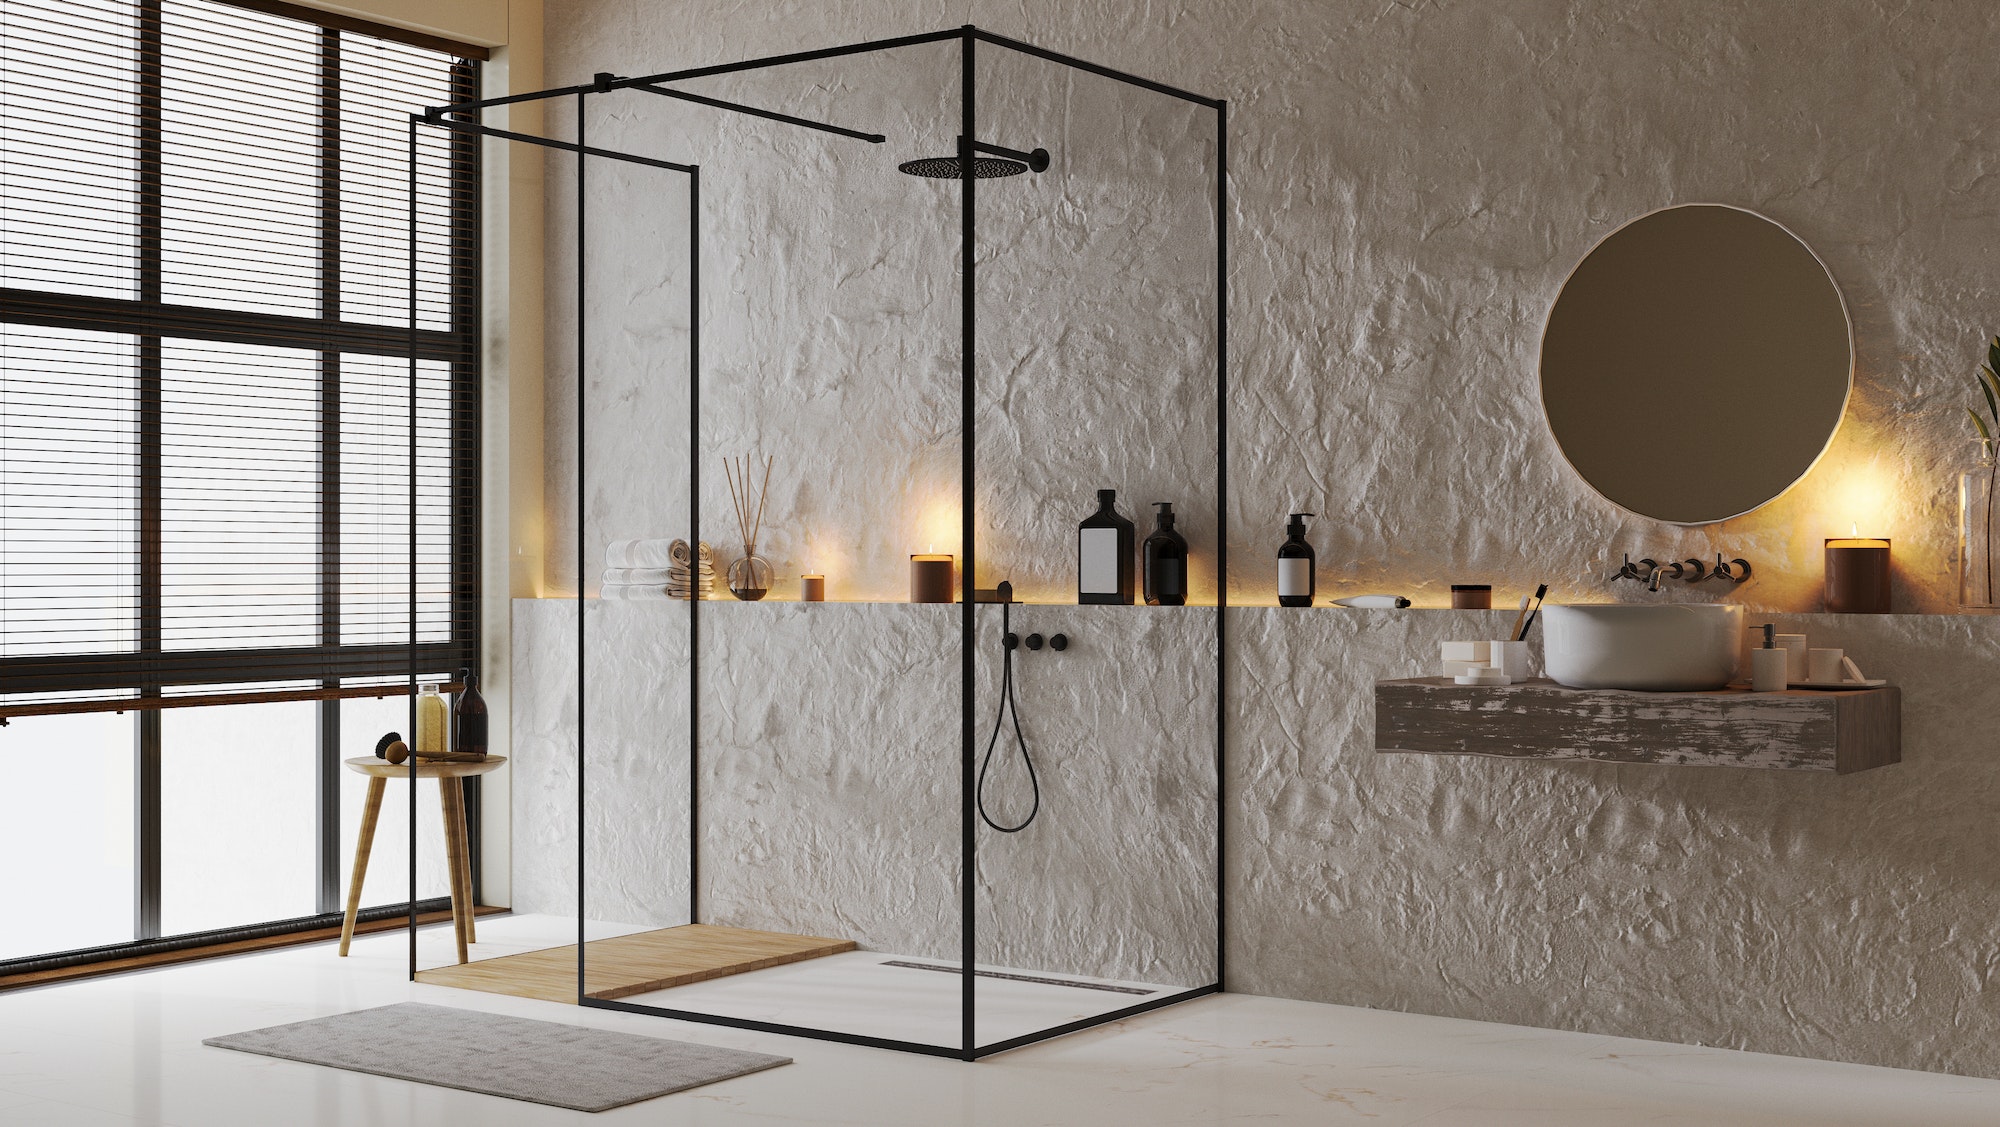 7 Minimalist Bathroom Ideas In Neutral Walls And Large Shower Space In Glass